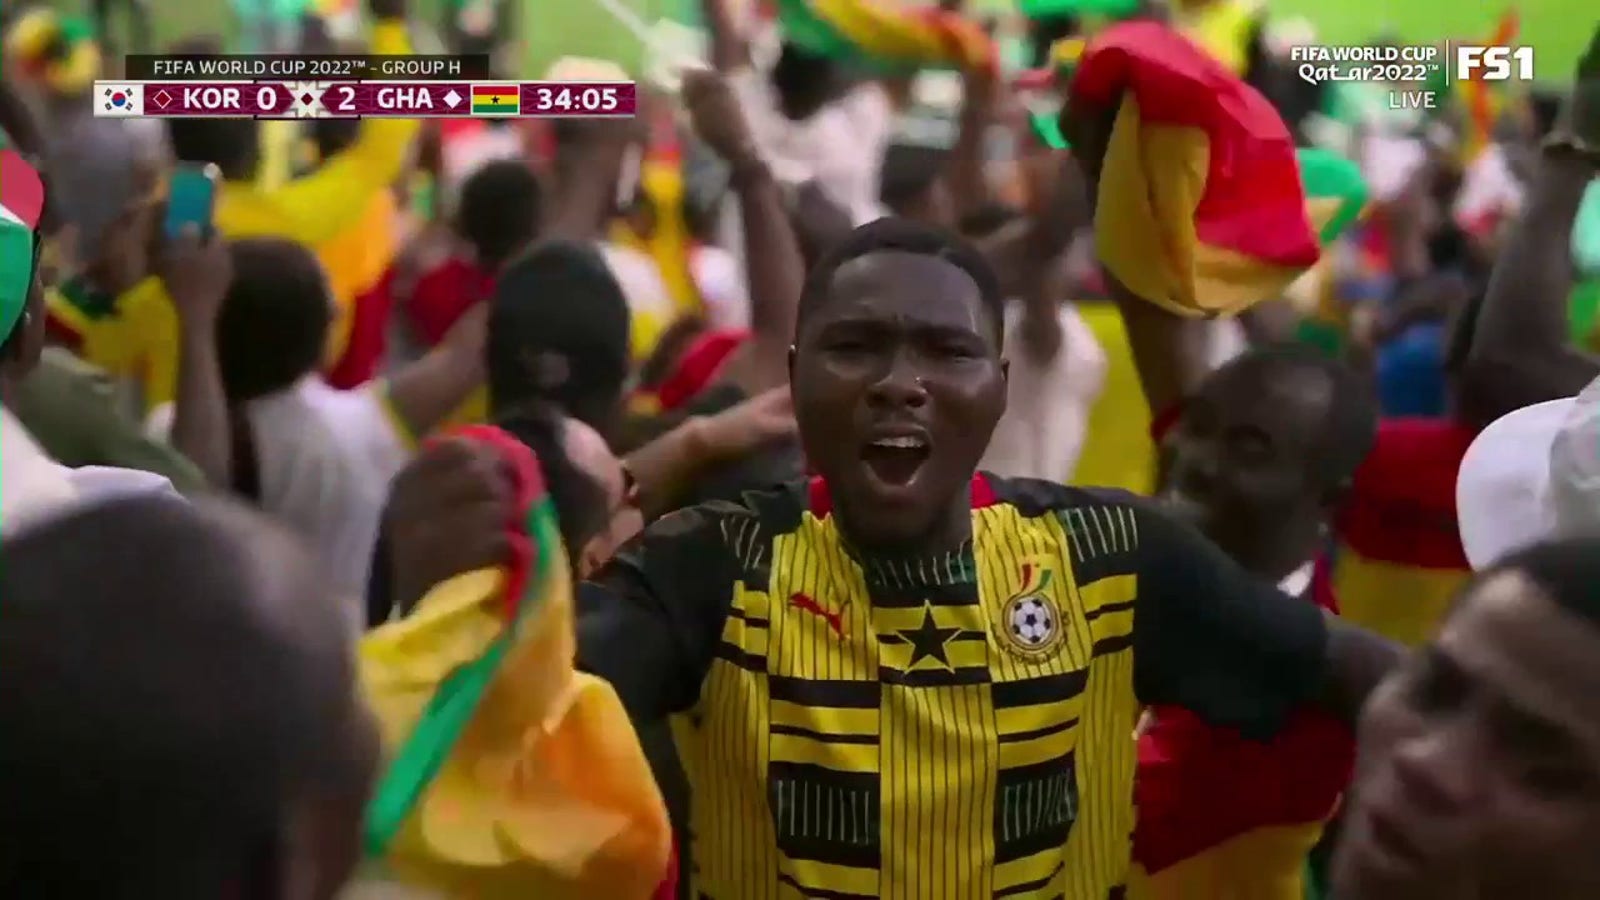 Ghana's Mohamed Kudus scores in the 34th minute against South Korea | 2022 FIFA World Cup